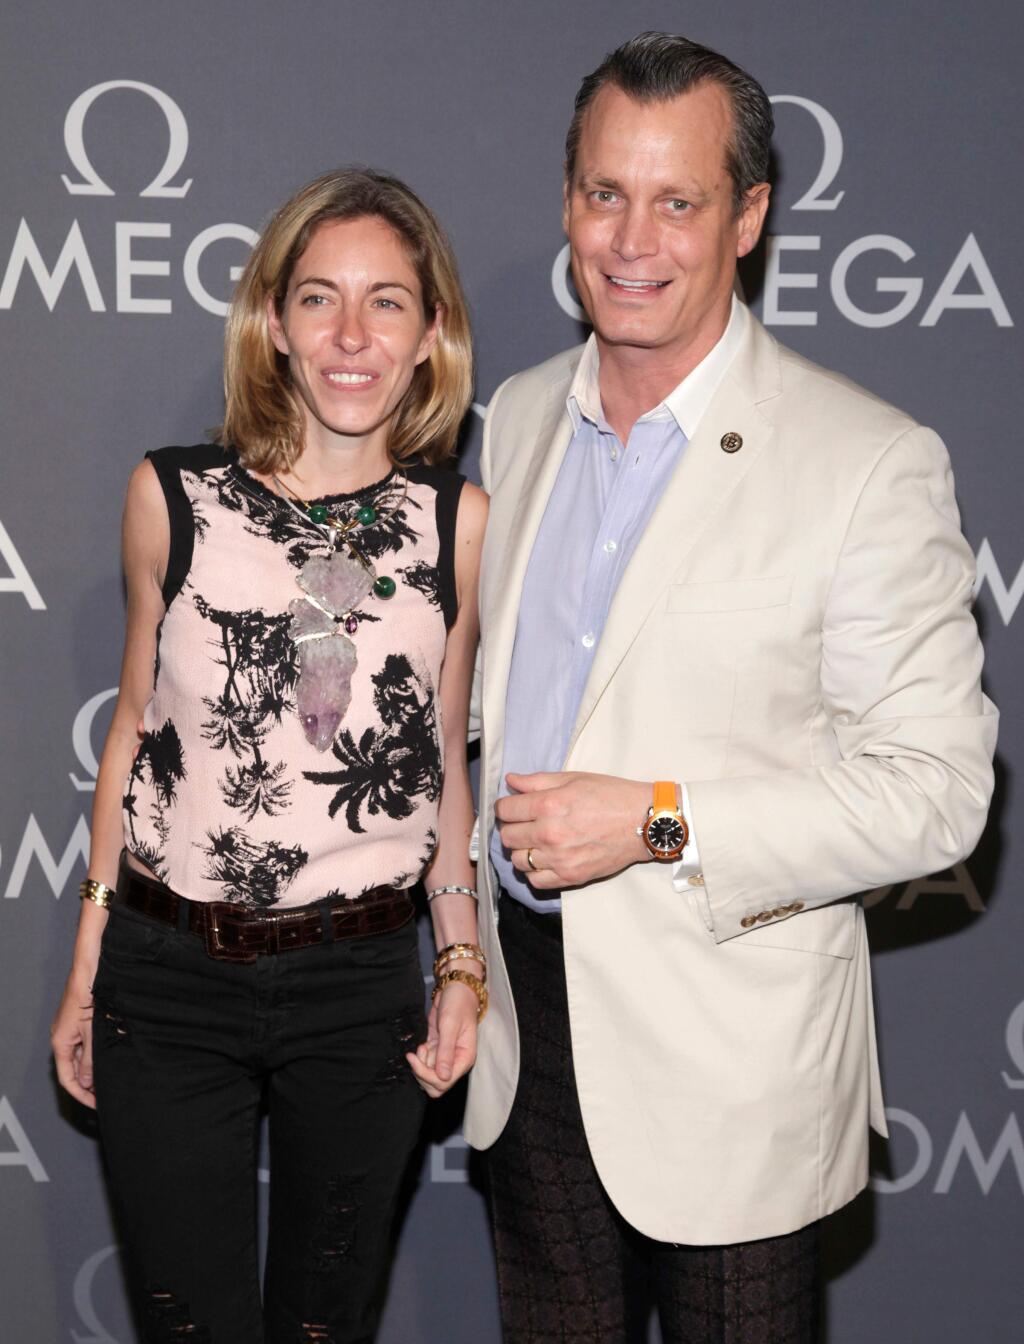 FILE- In this June 10, 2014, file photo, Nicole Mellon, left, and Matthew Mellon, right, attend the Omega Speedmaster Dark Side of the Moon launch event in New York. Billionaire banking heir Matthew Mellon has died. His cousin Peter Stephaich confirmed Mellon's death but declined Tuesday, April 17, 2018, to provide any details. He was 54. (Photo by Andy Kropa/Invision/AP, File)